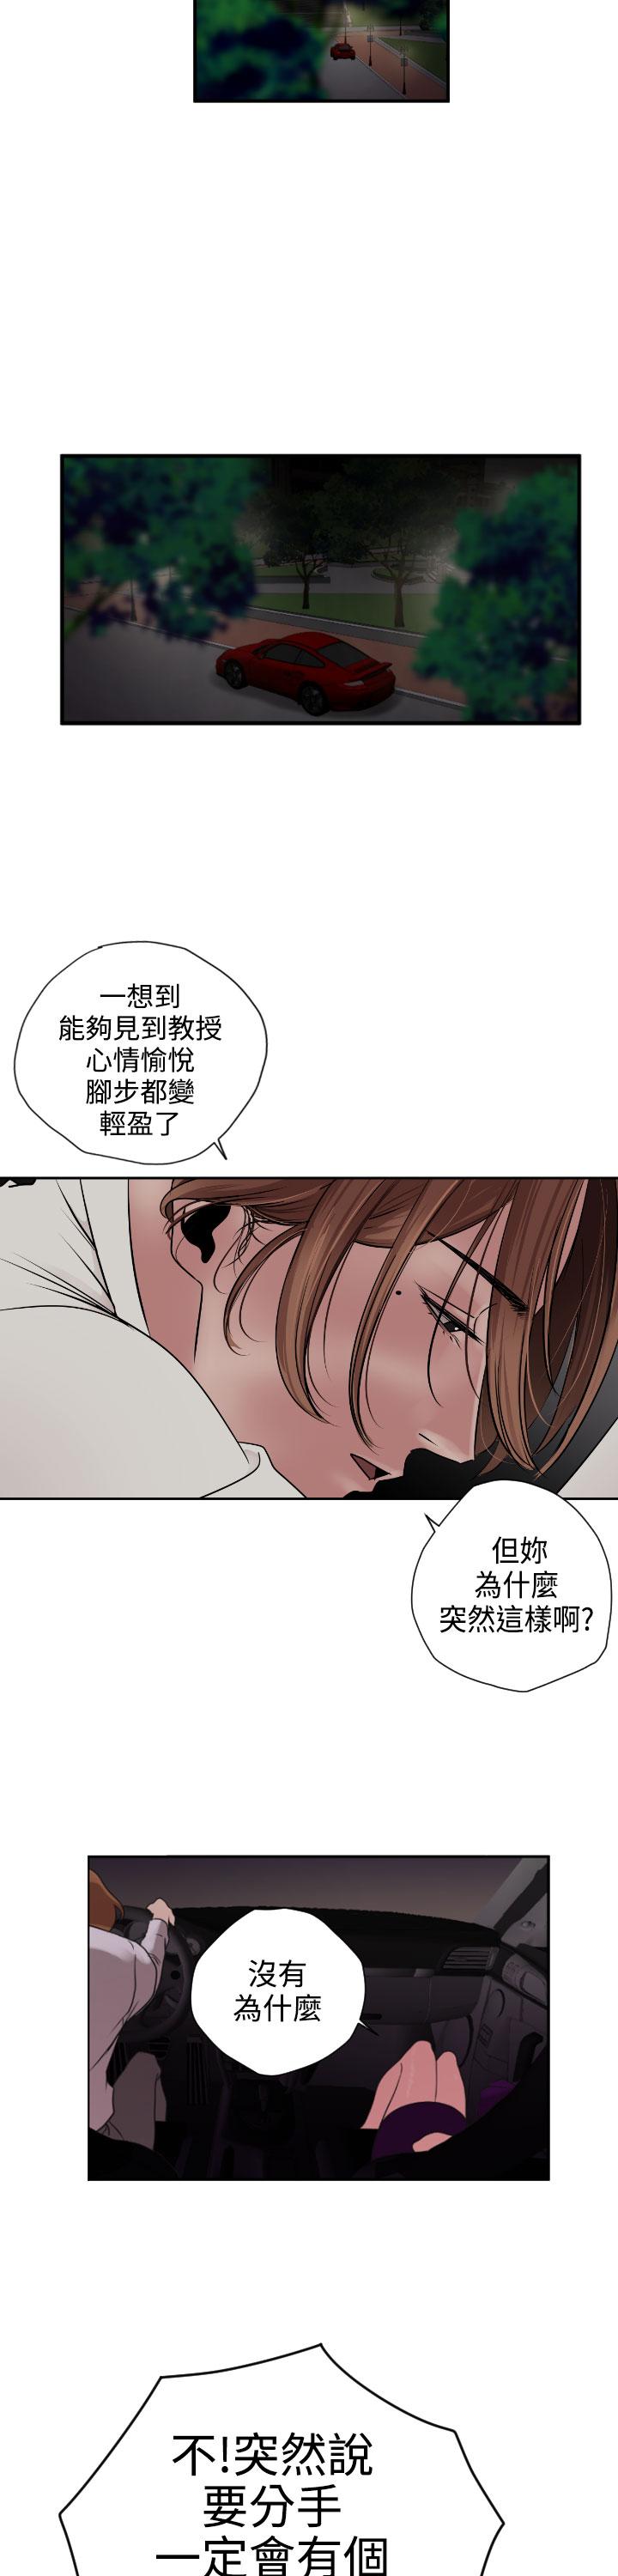 Desire King (慾求王) Ch.1-7 (chinese) 71